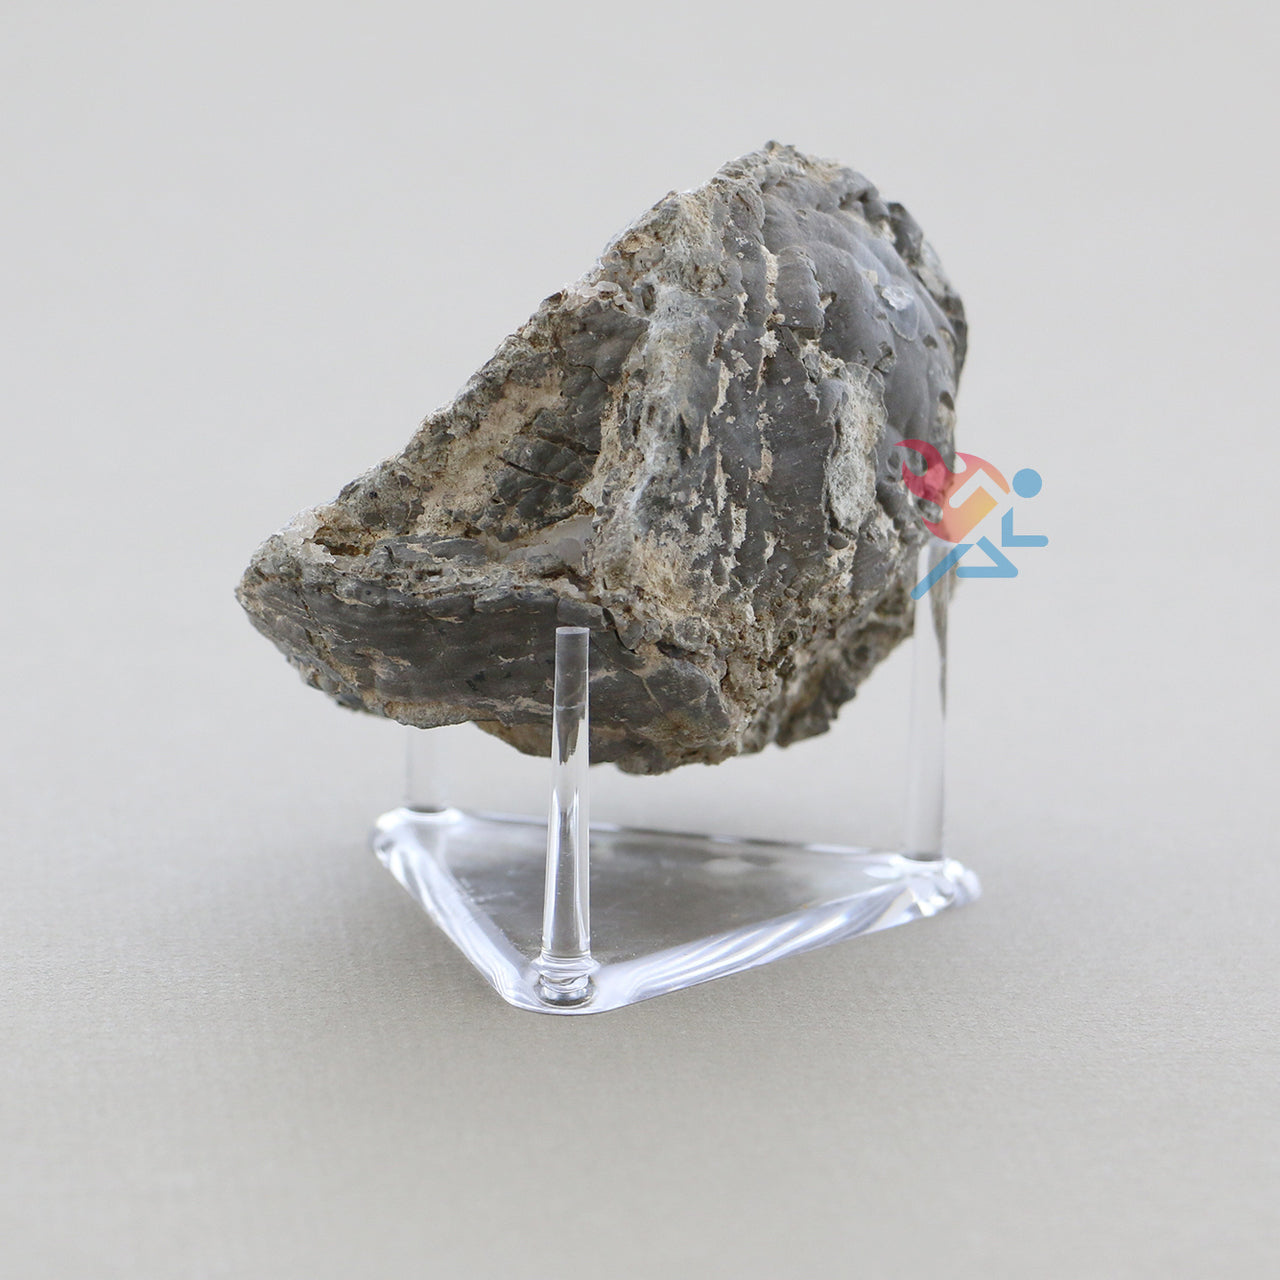 2.5" Angled Triangle 3-Peg Display Stands for Minerals Fossils Geodes